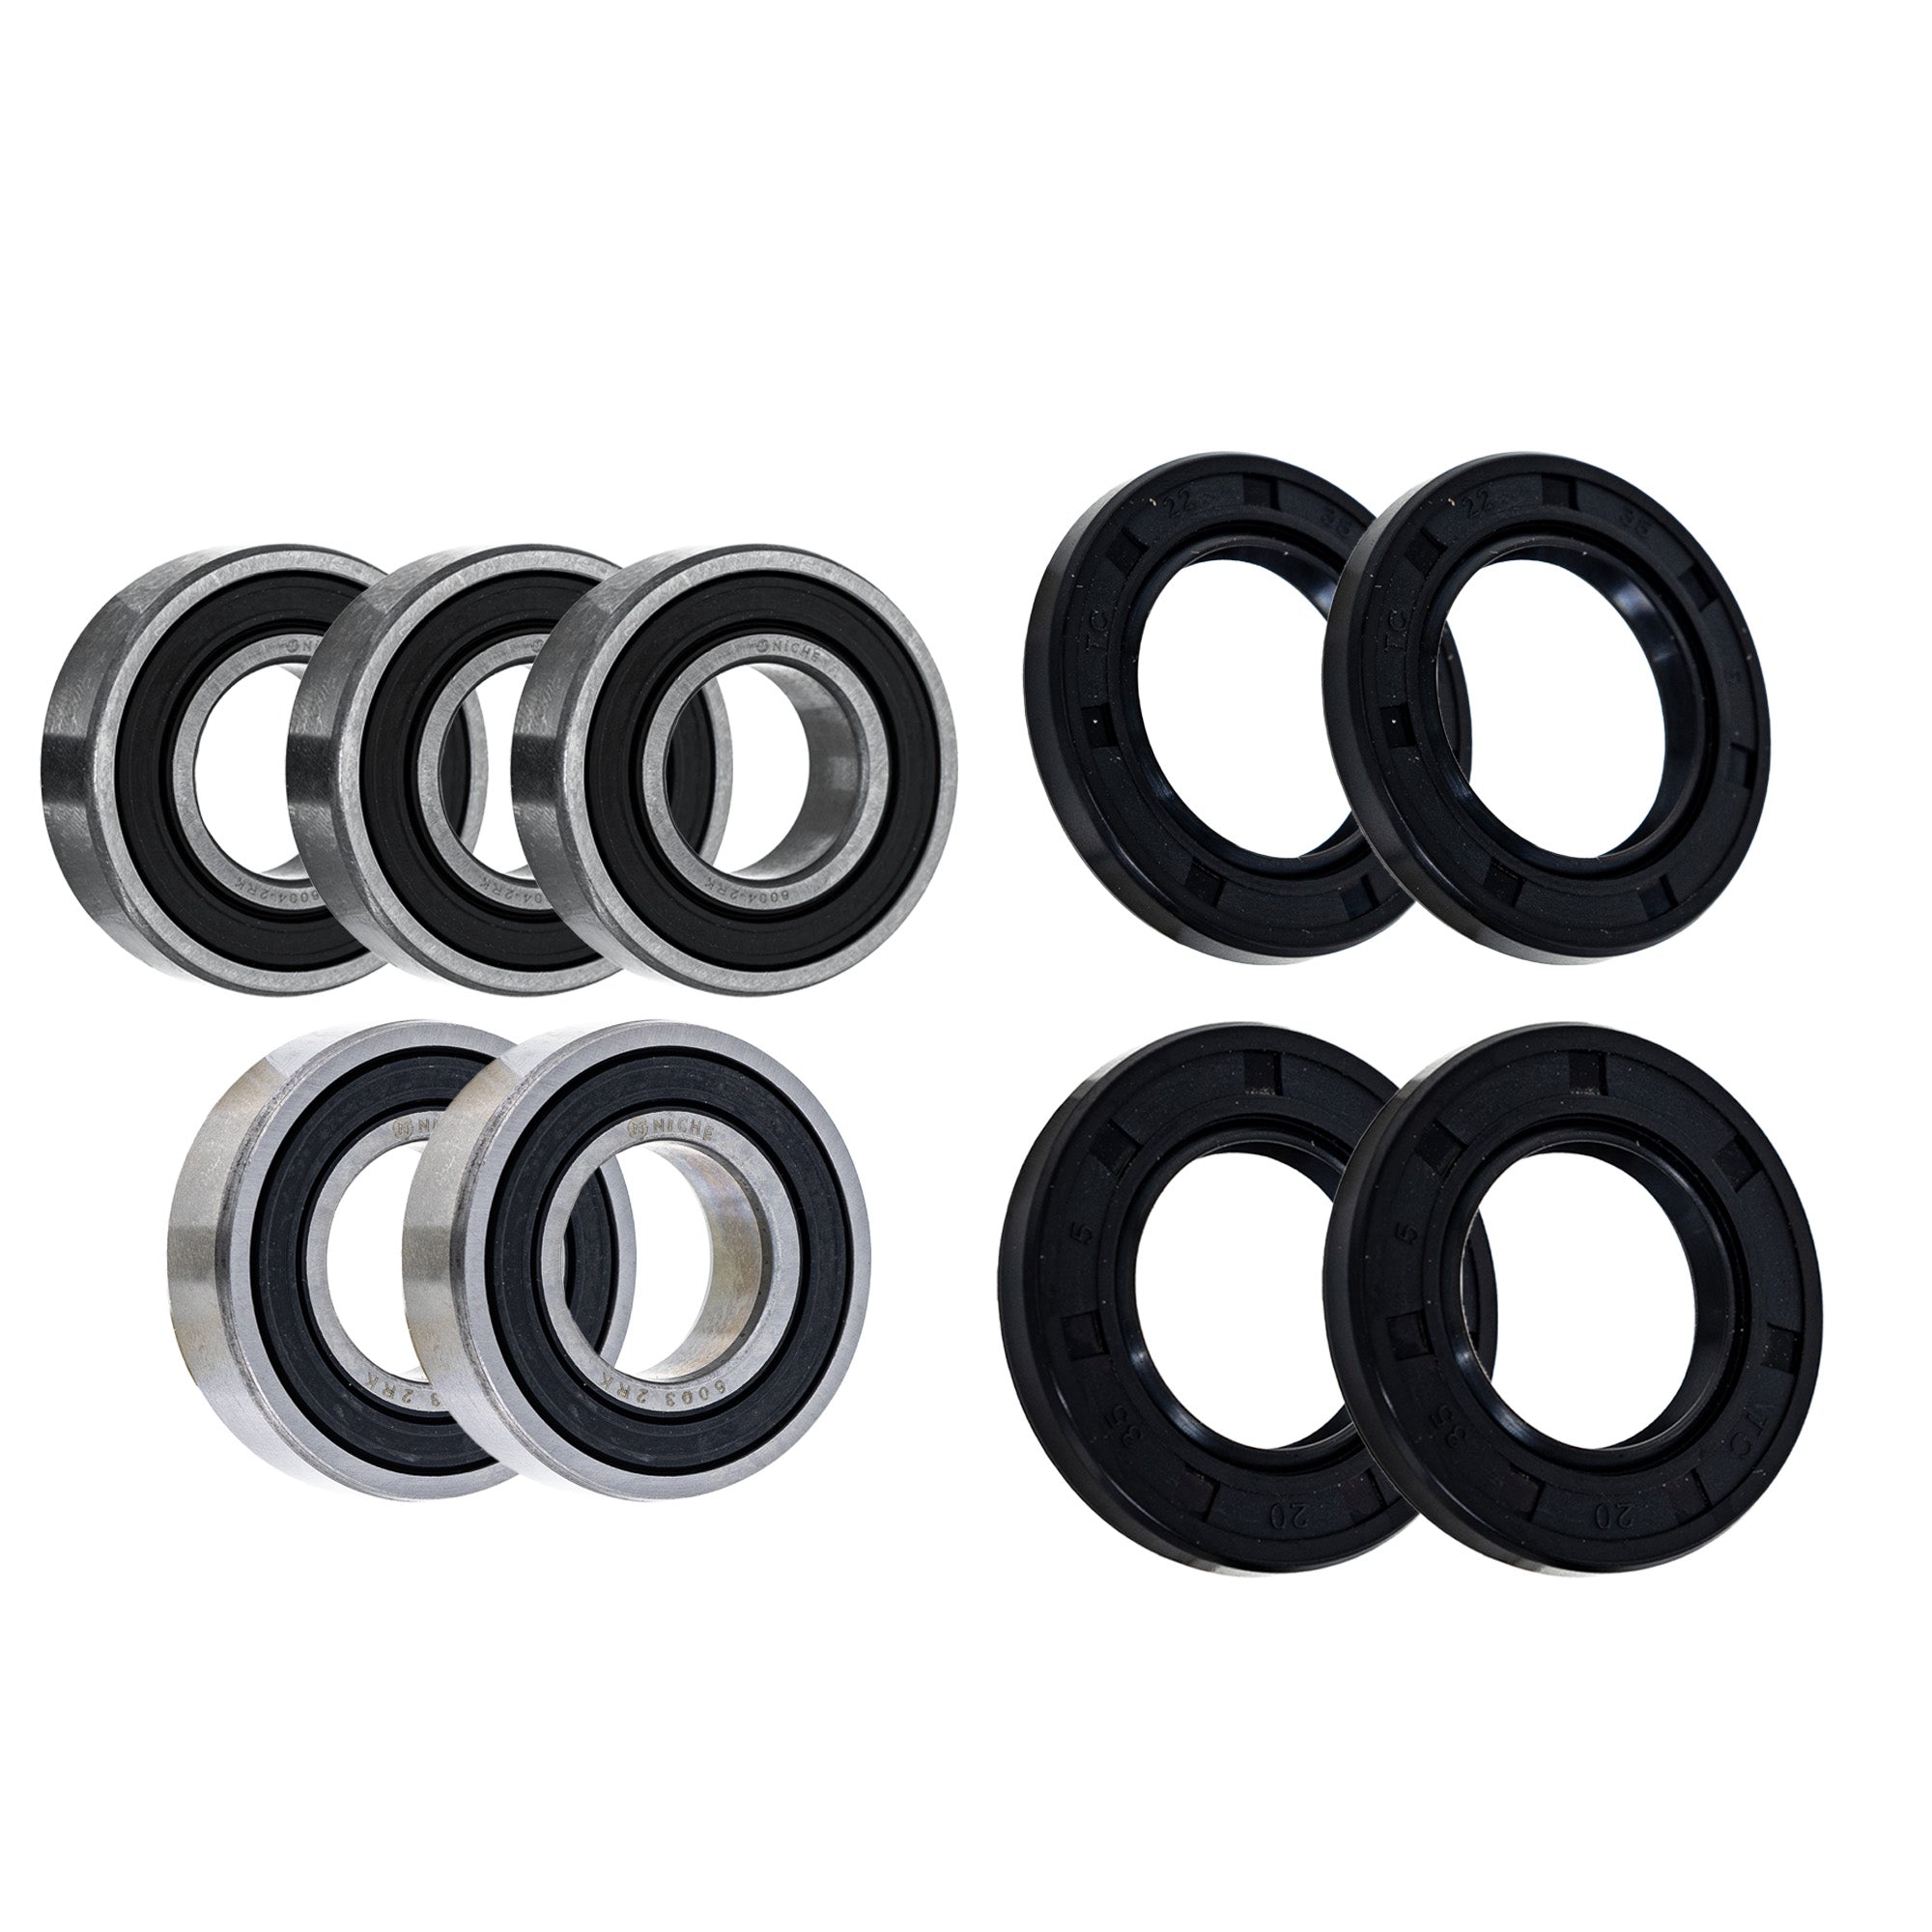 Wheel Bearing Seal Kit for zOTHER YZ250 YZ125 WR250Z WR250 NICHE MK1008707